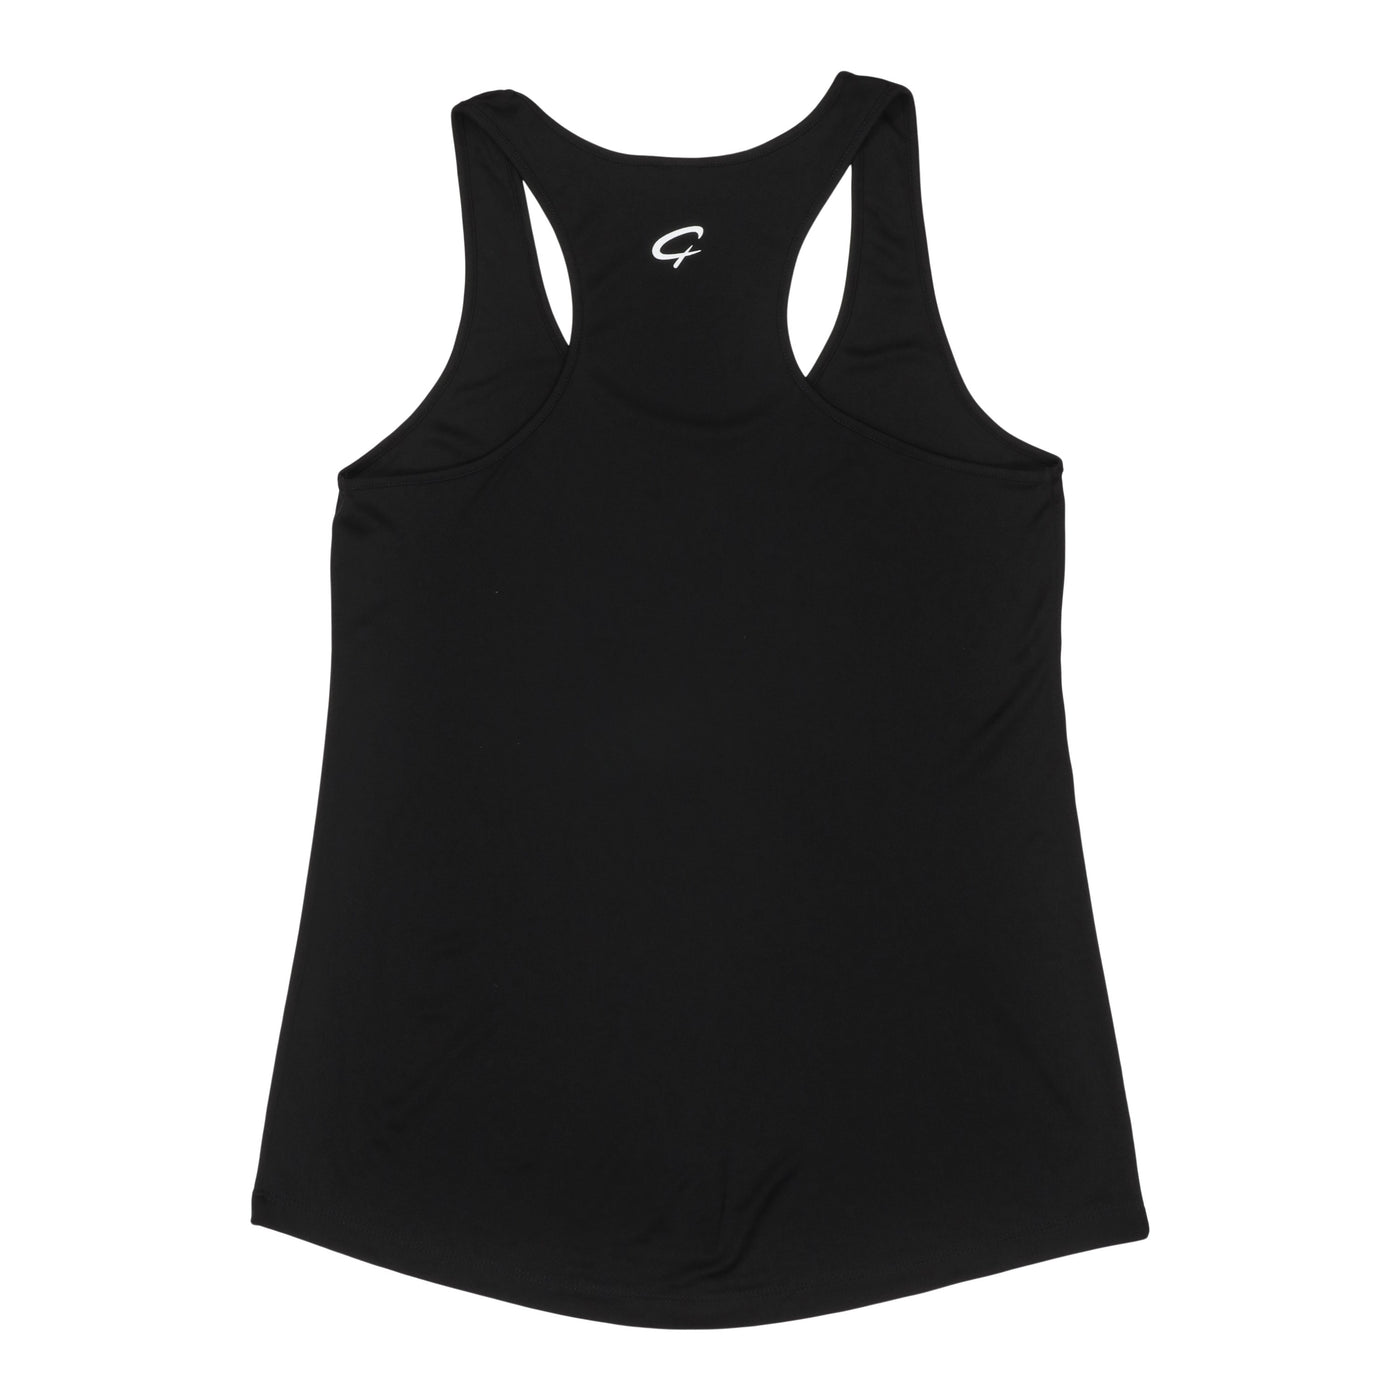 Created Women's Bold Performance black tank top rear view